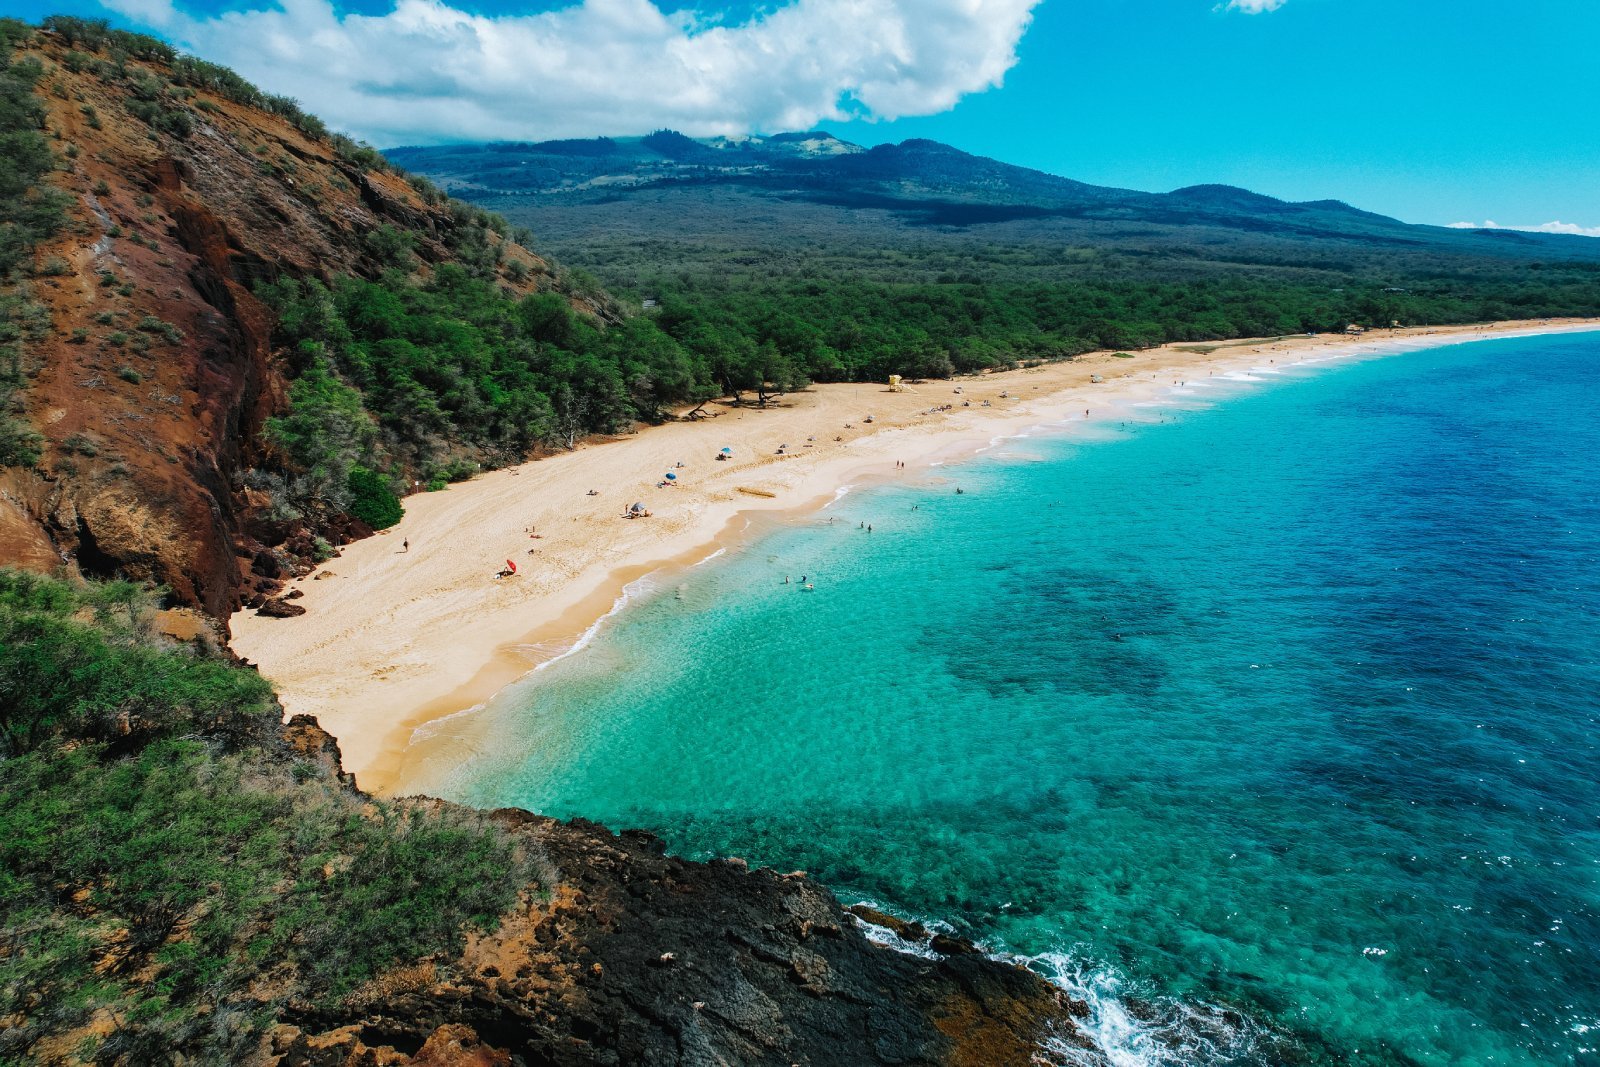 <p class="wp-caption-text">Image Credit: Shutterstock / Aspects and Angles</p>  <p><span>Maui, the second-largest of the Hawaiian islands, is celebrated for its stunning landscapes, from the summit of Haleakal? to the beaches of Wailea. The island’s dedication to sustainability is seen in its protection of natural resources, promoting local agriculture, and developing renewable energy.</span></p>